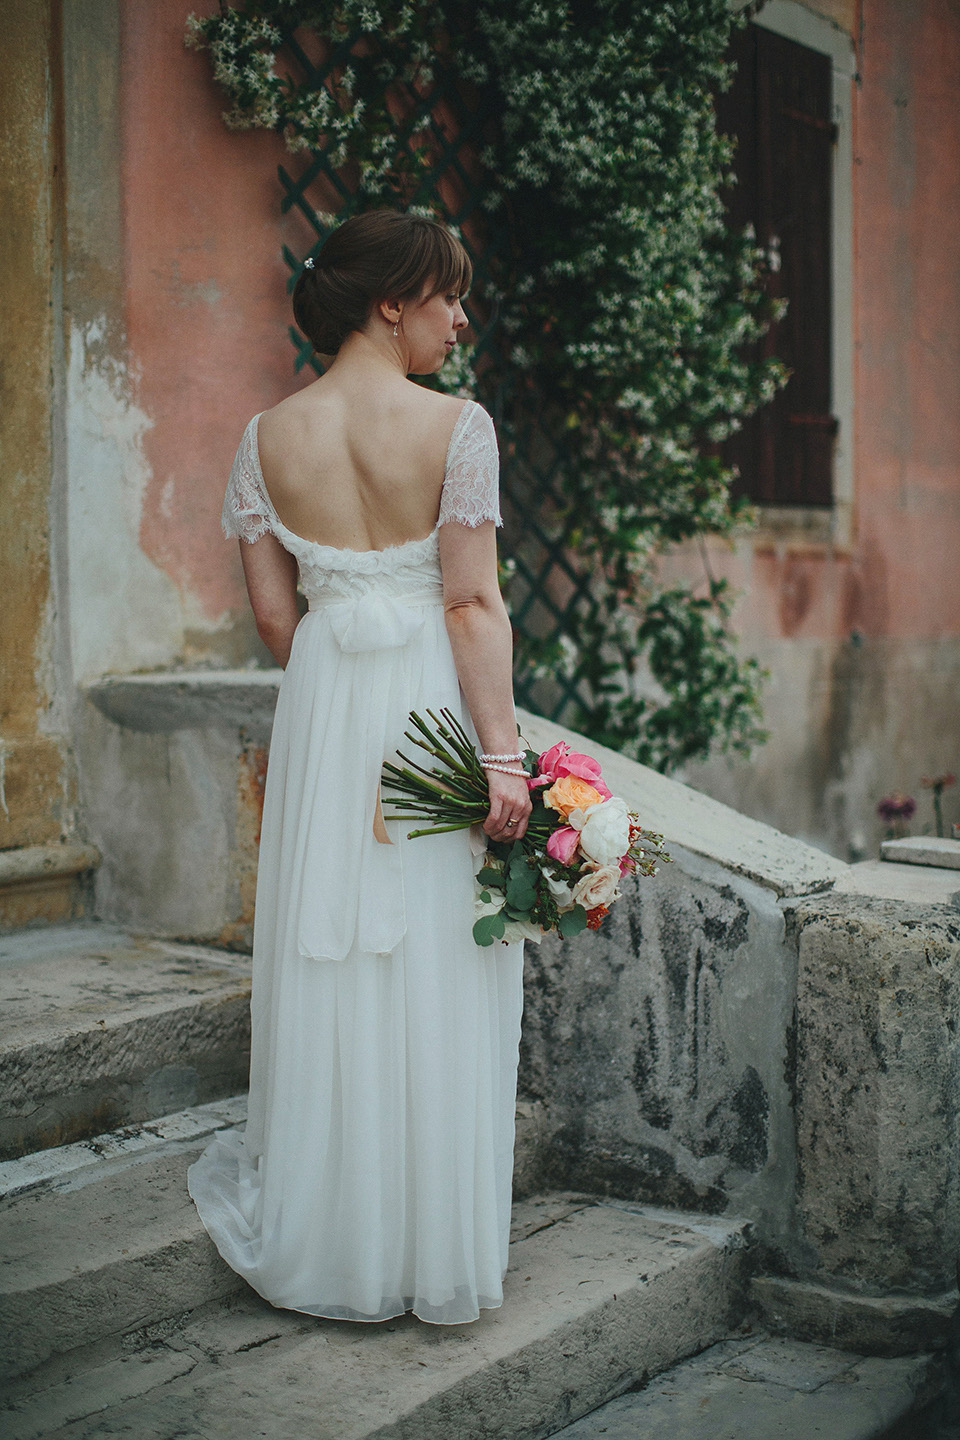 The bride wears Grace Loves Lace for her laid back, rustic, simple and elegant outdoor wedding in the Italian hillsides. Photography by Peter Jurica, film by Happy Wedding Films.